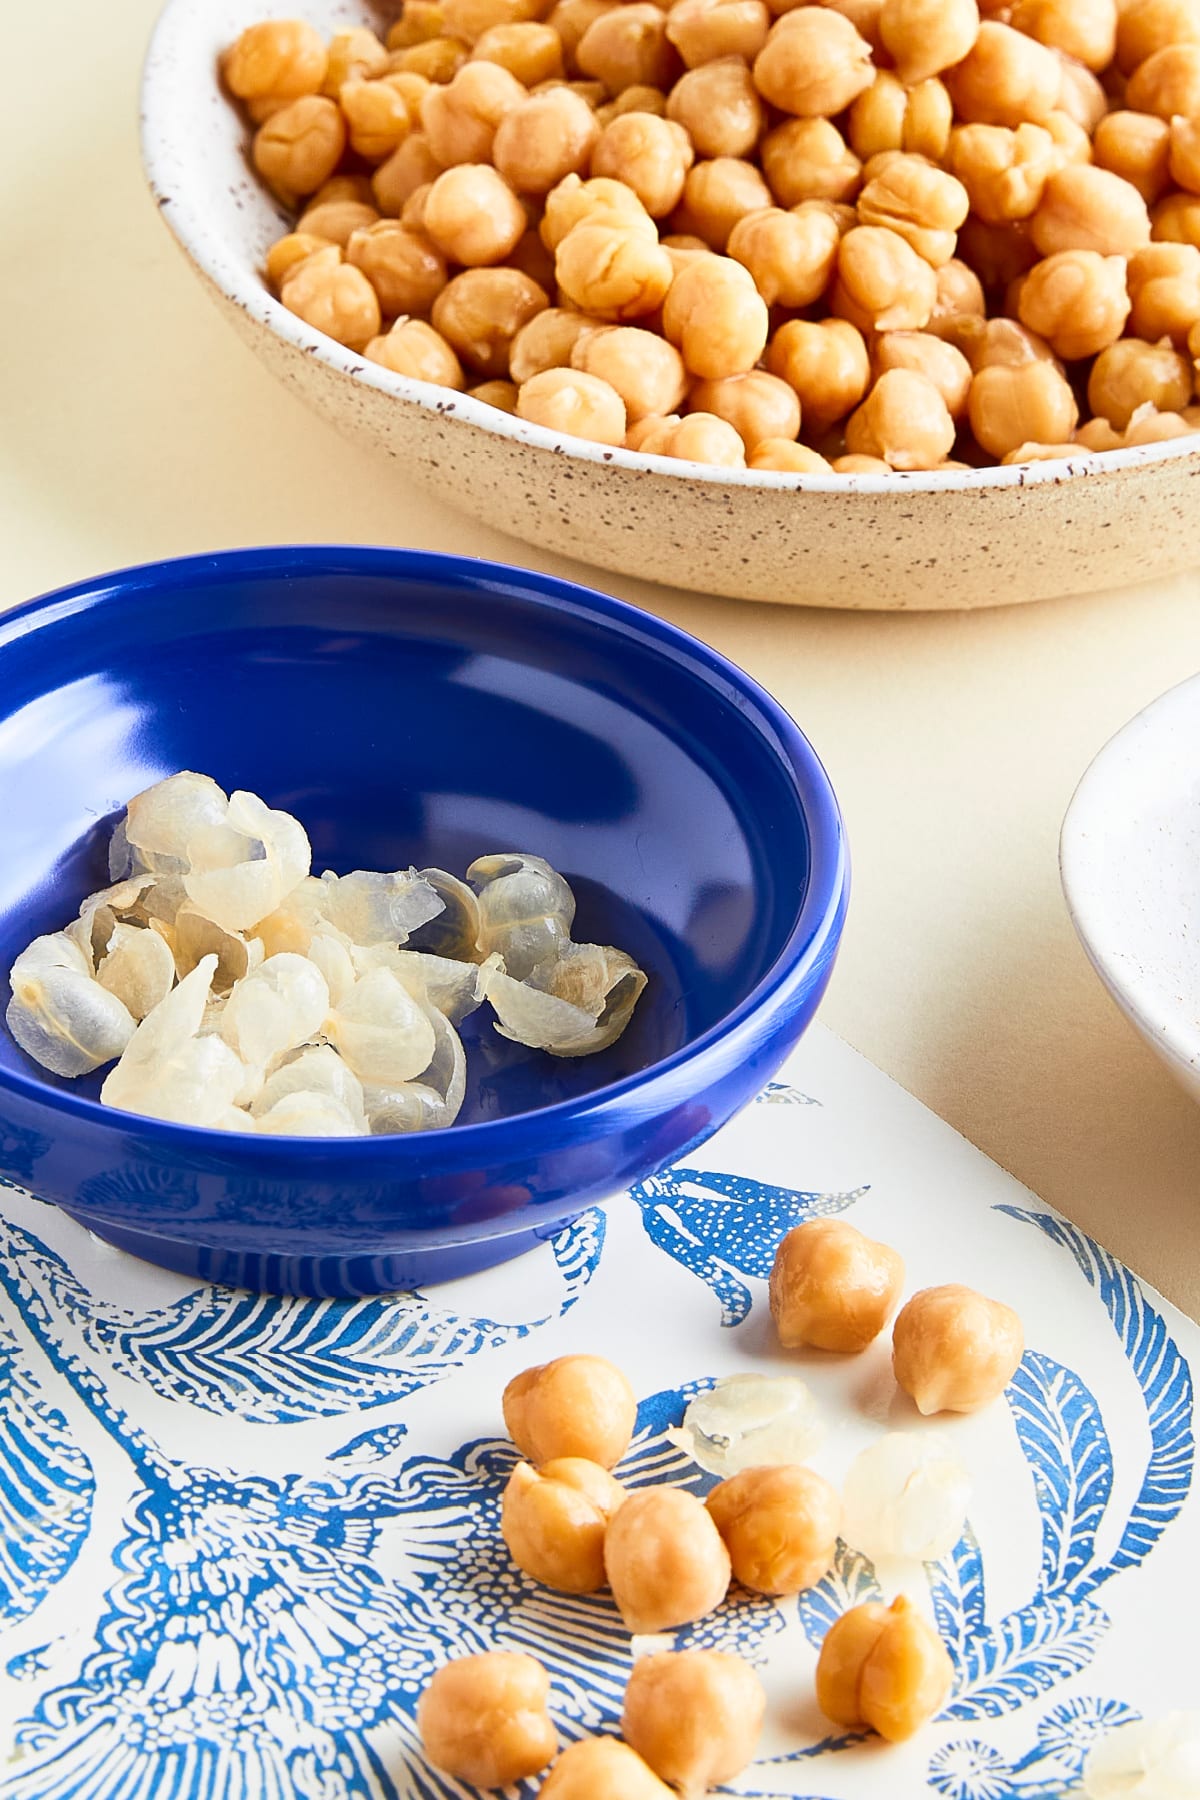 The process of peeling cooked chickpeas for a smoother hummus: a bowl of peeled chickpeas, another bowl of unpeeled chickpeas, and a small bowl of the peels.